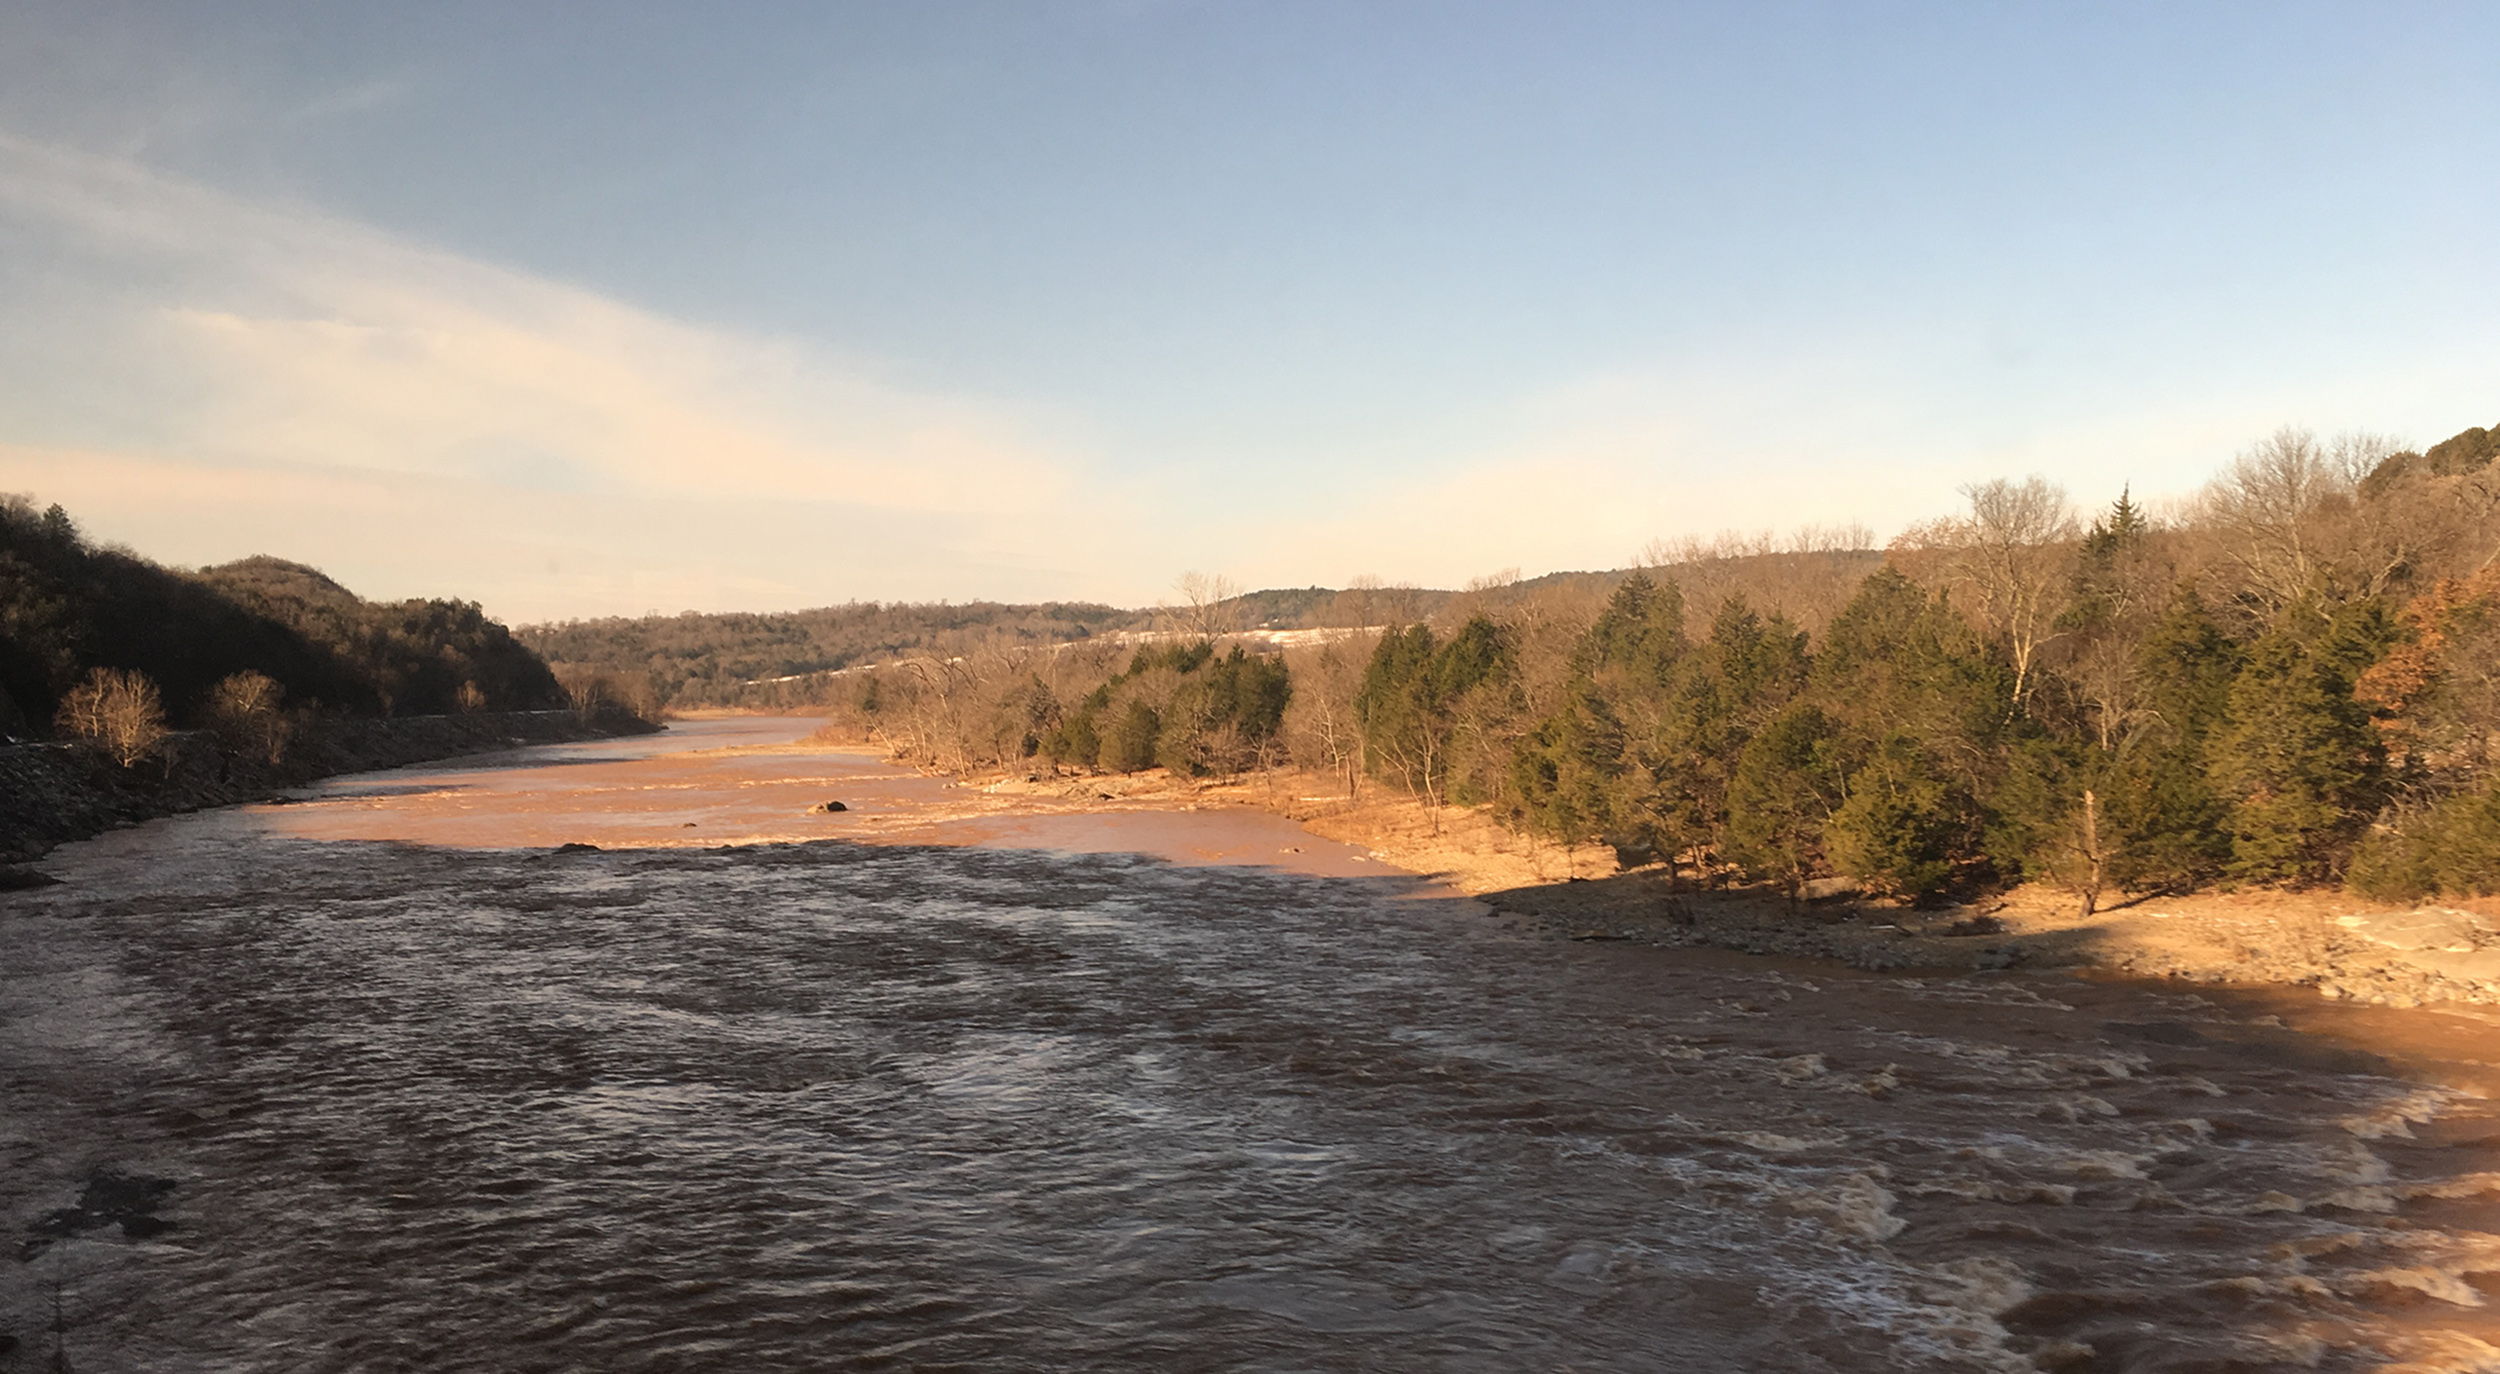 The Red River on the Oklahoma-Texas border.